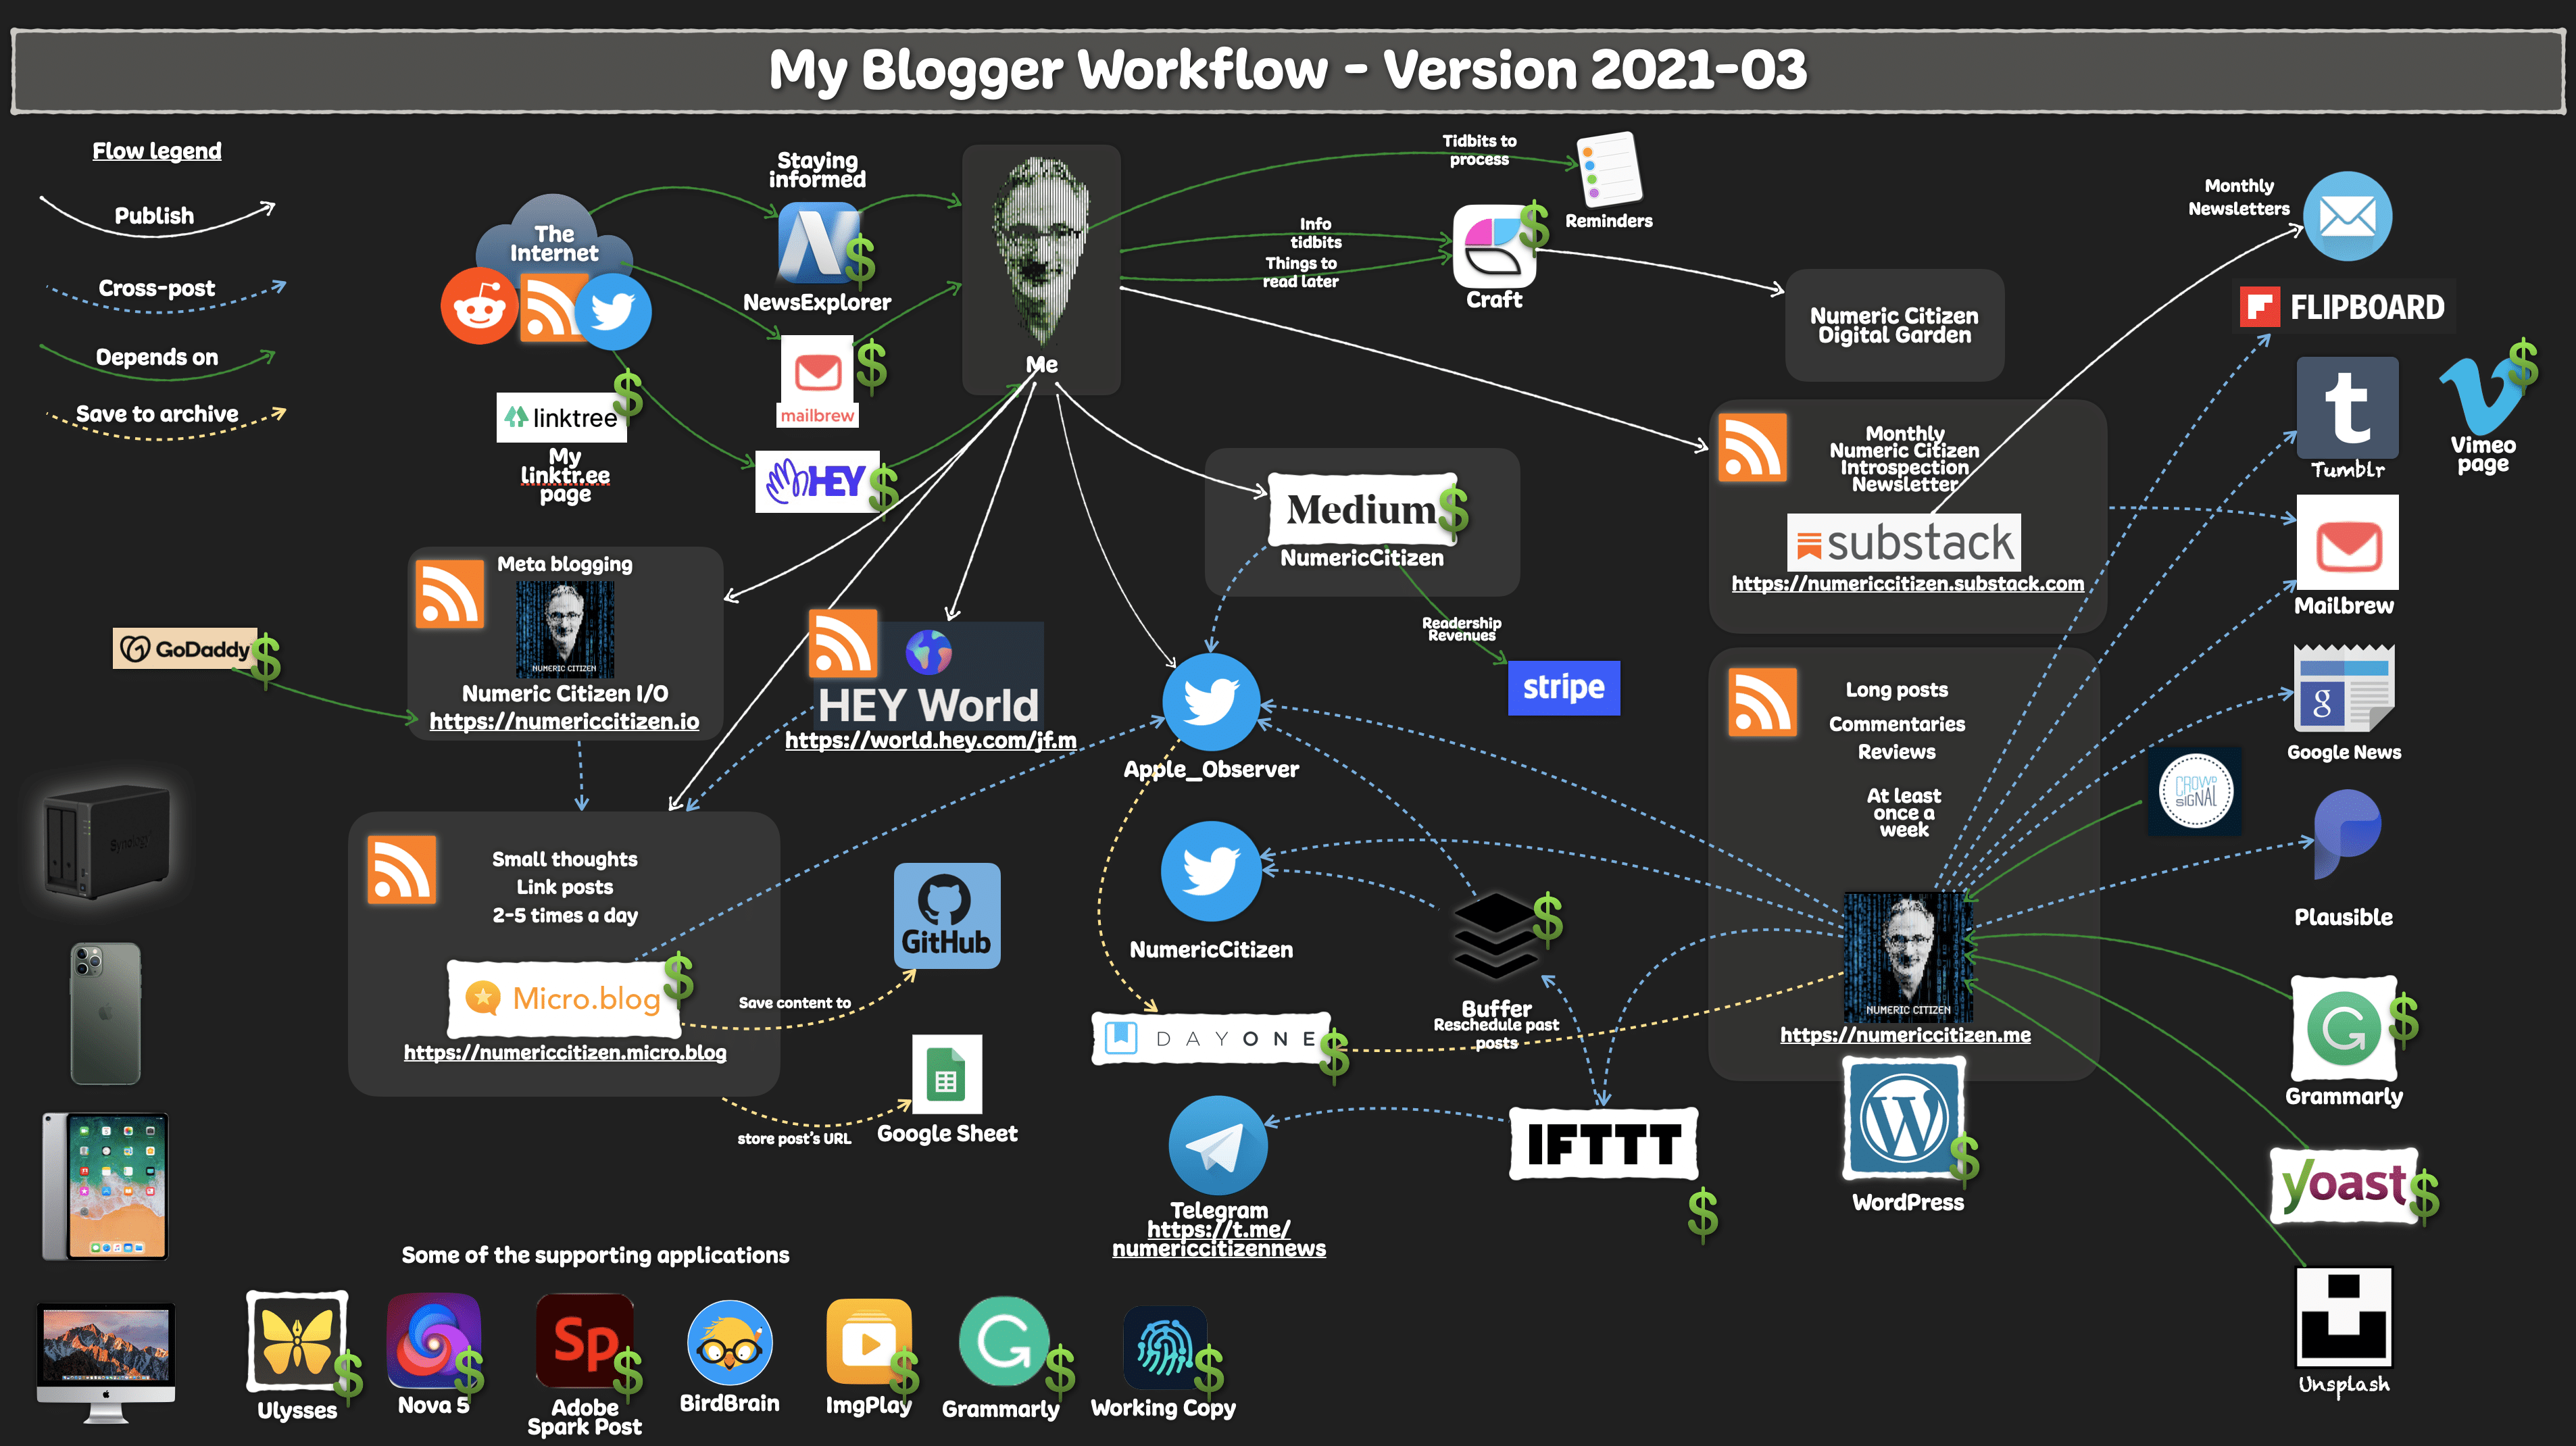 My Blogger Workflow as of 2021-03